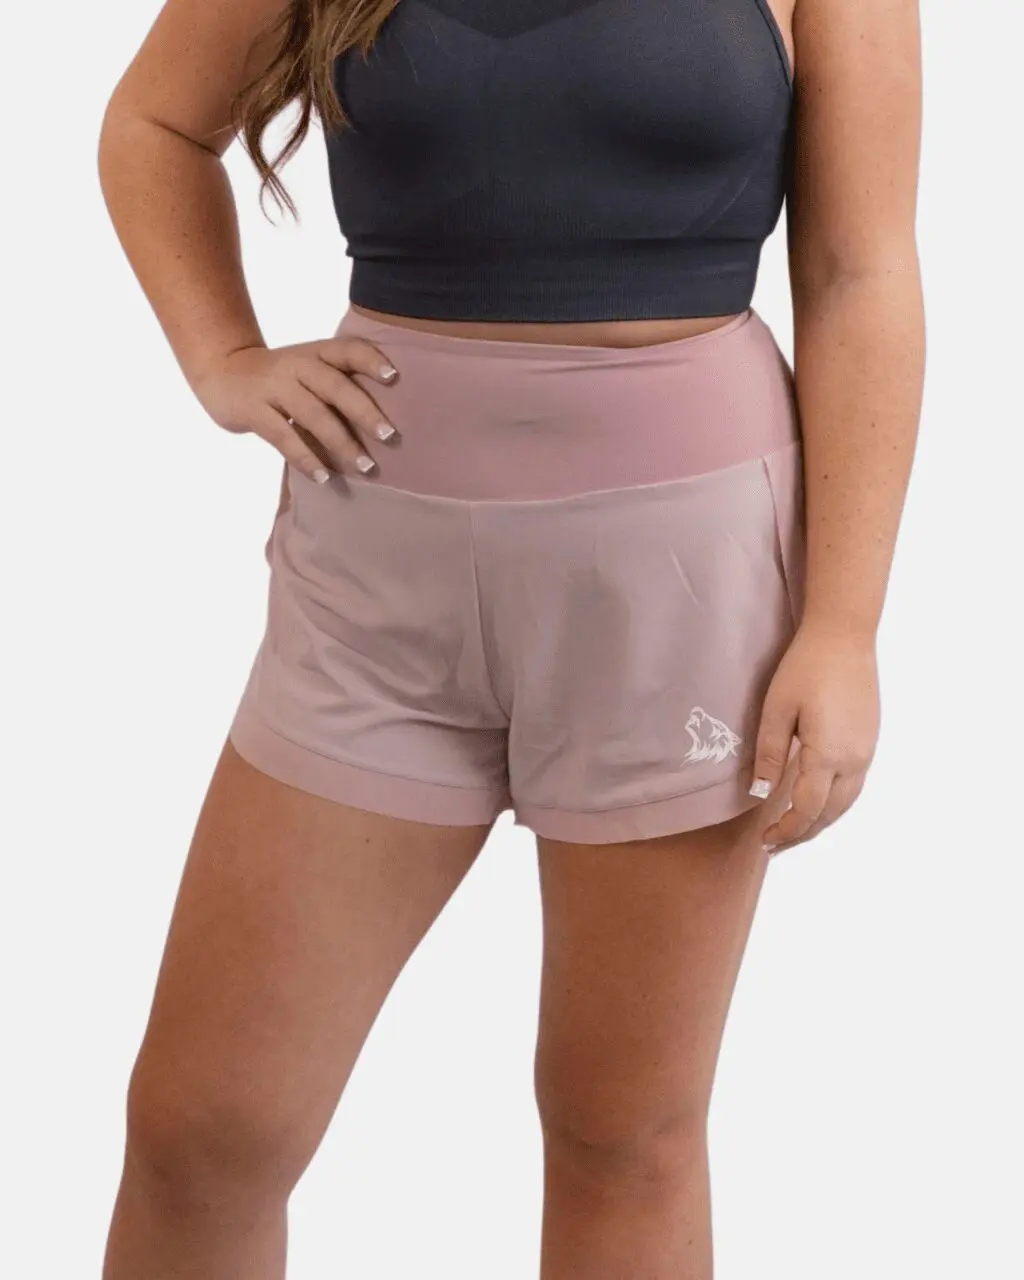 A woman wearing pink shorts and black top.